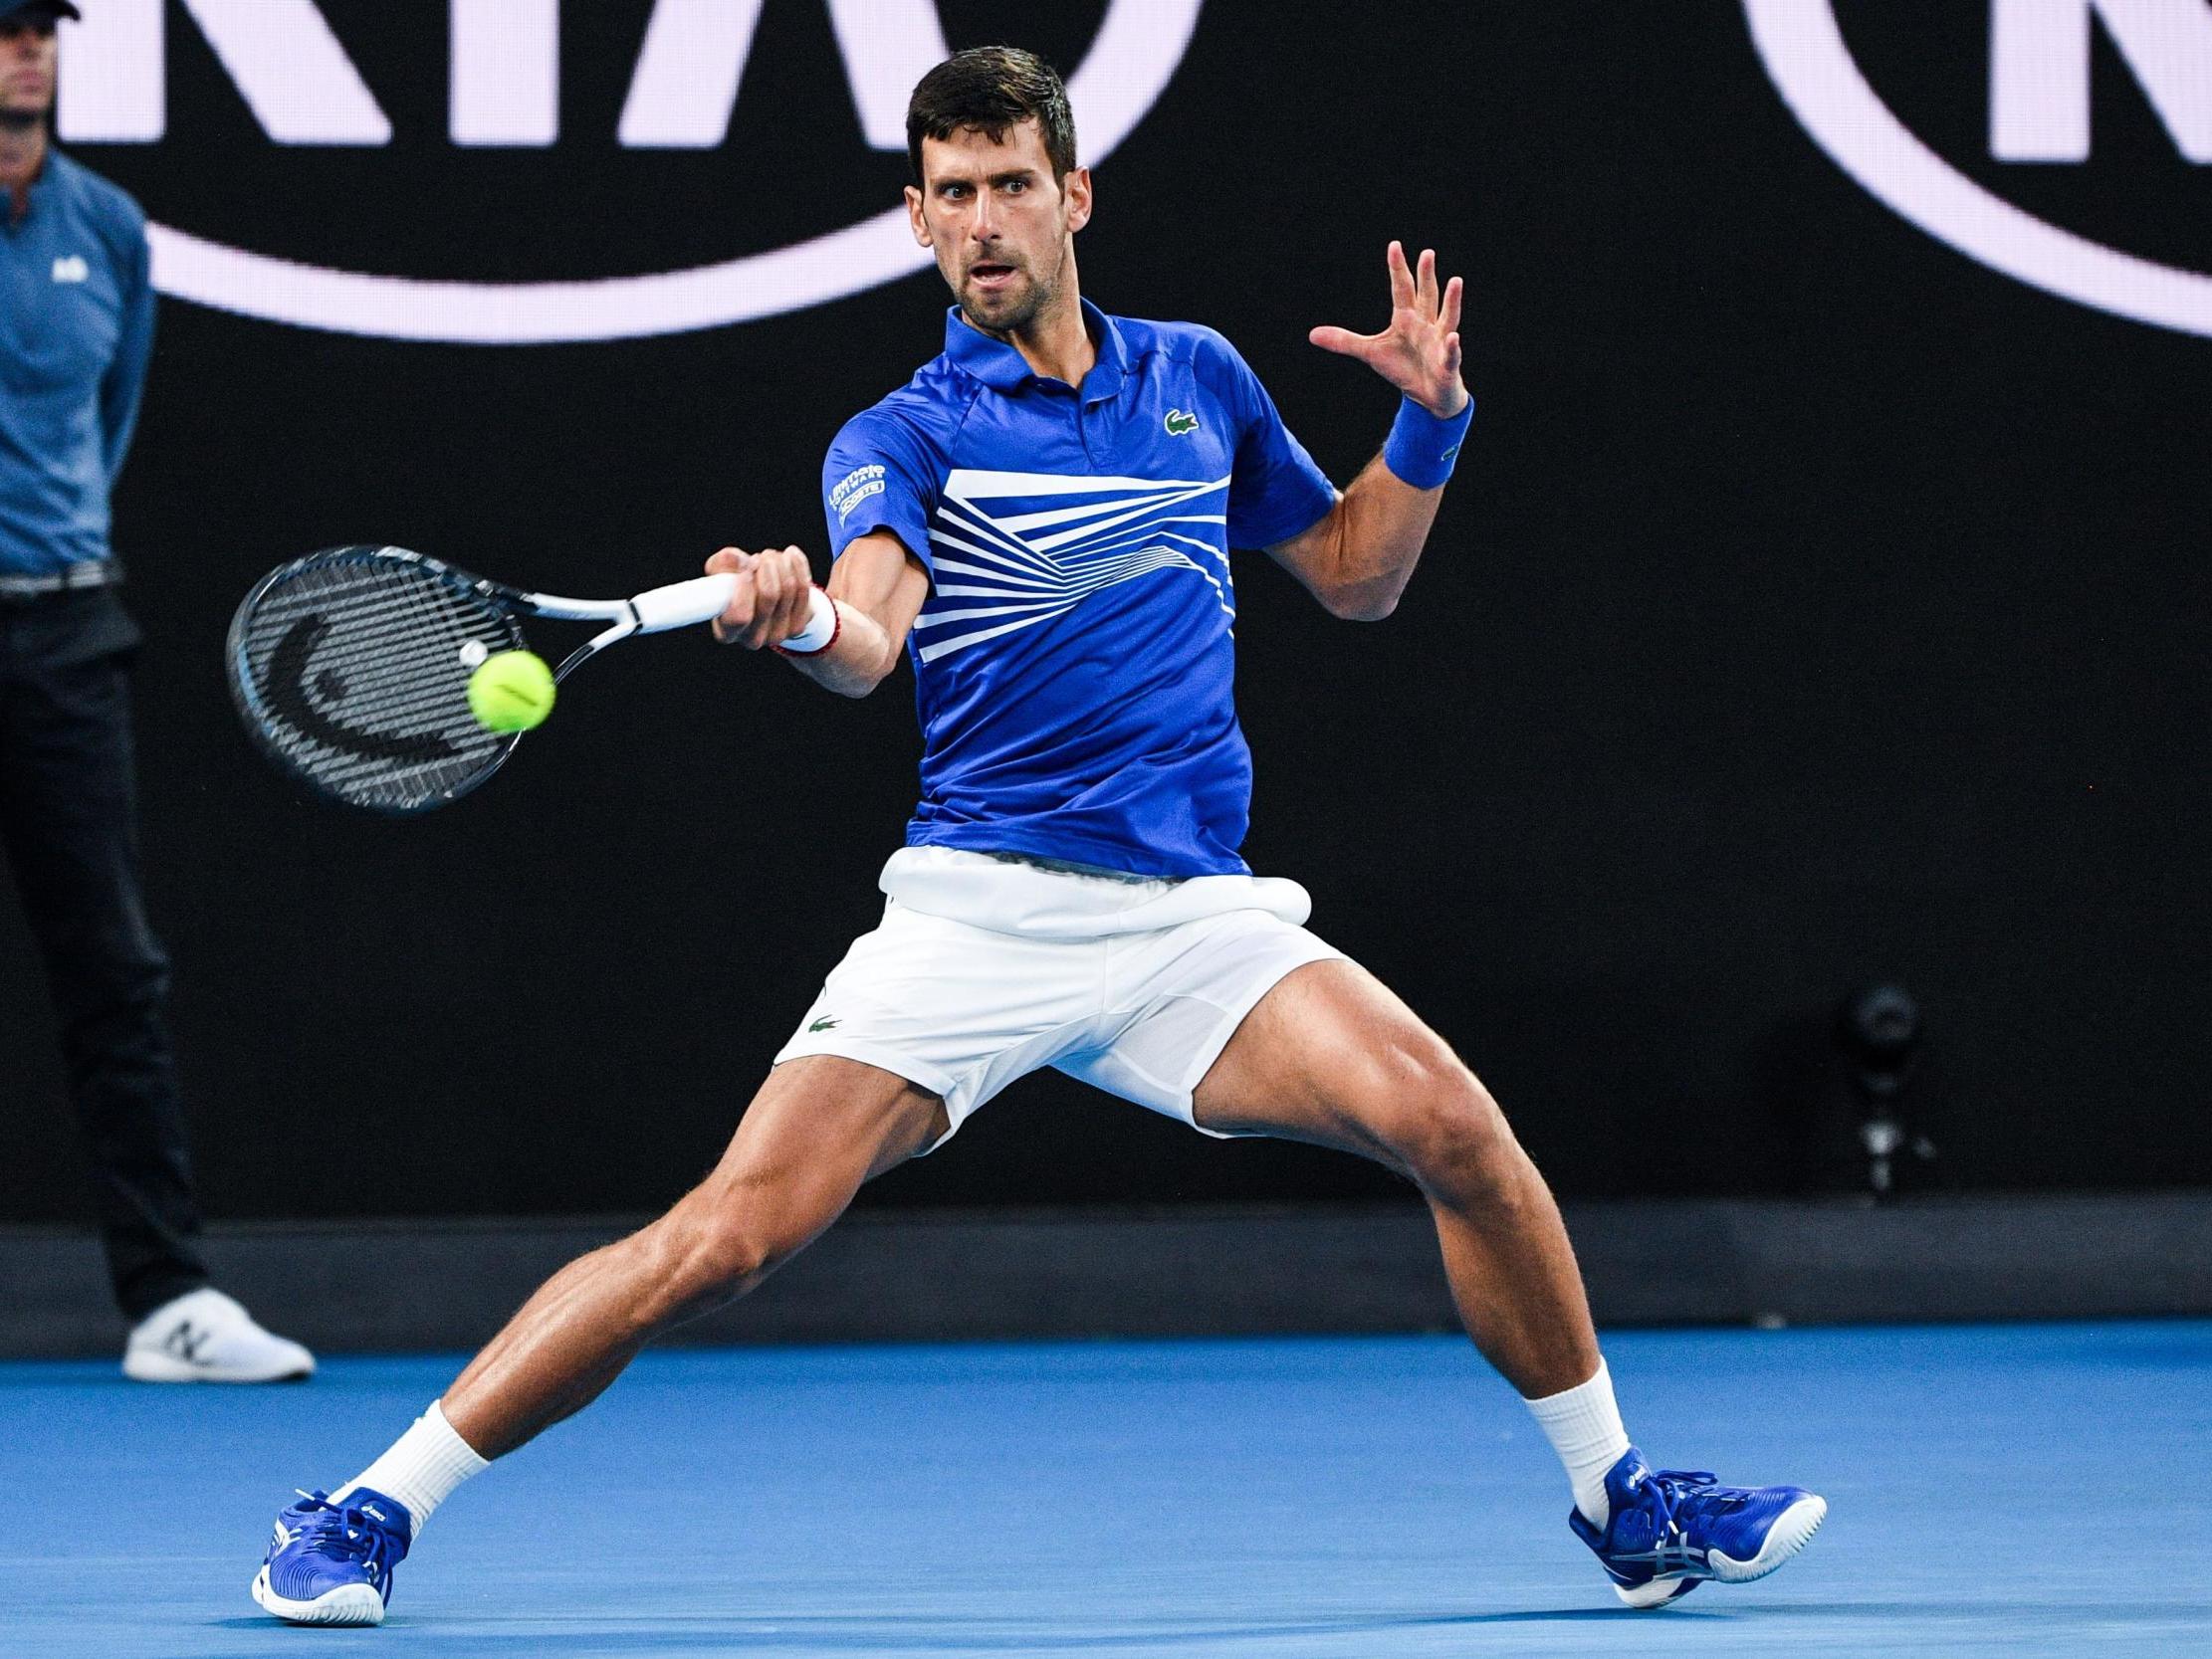 Djokovic benefited from his opponent’s physical problems to secure a place in the semi-finals